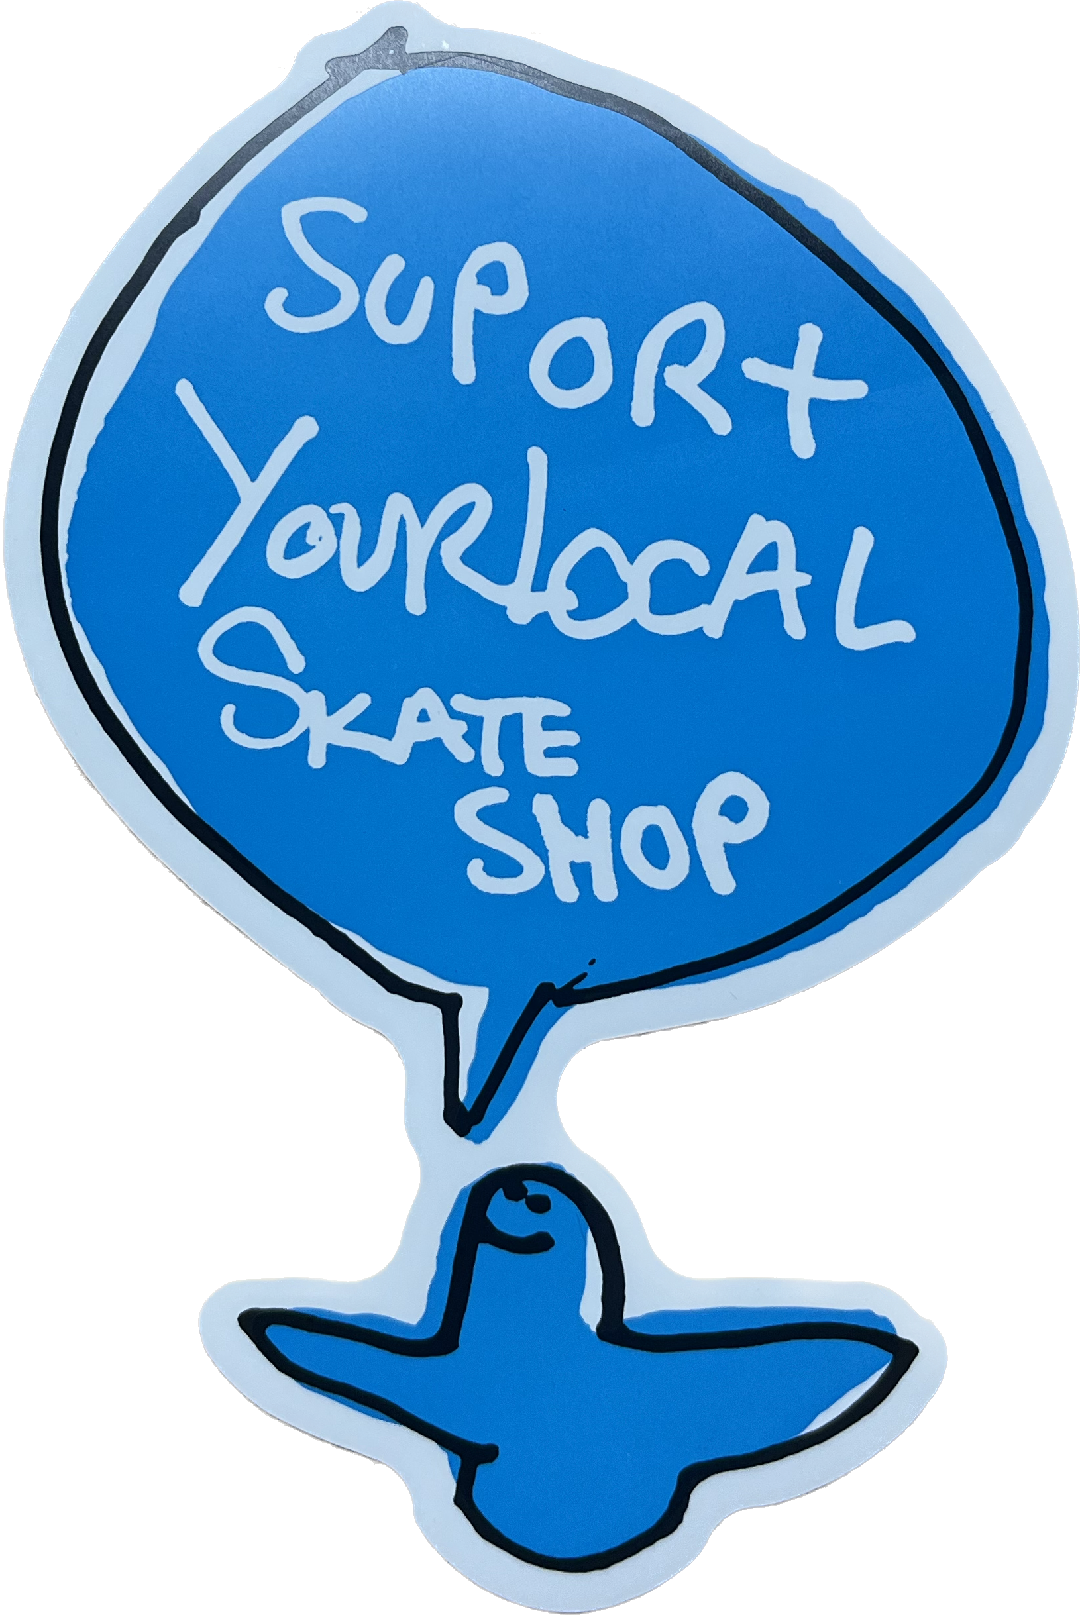 Skate Shop Day Sticker Support Your Local Skate Shop Art By Mark Gonzales  4"X5"